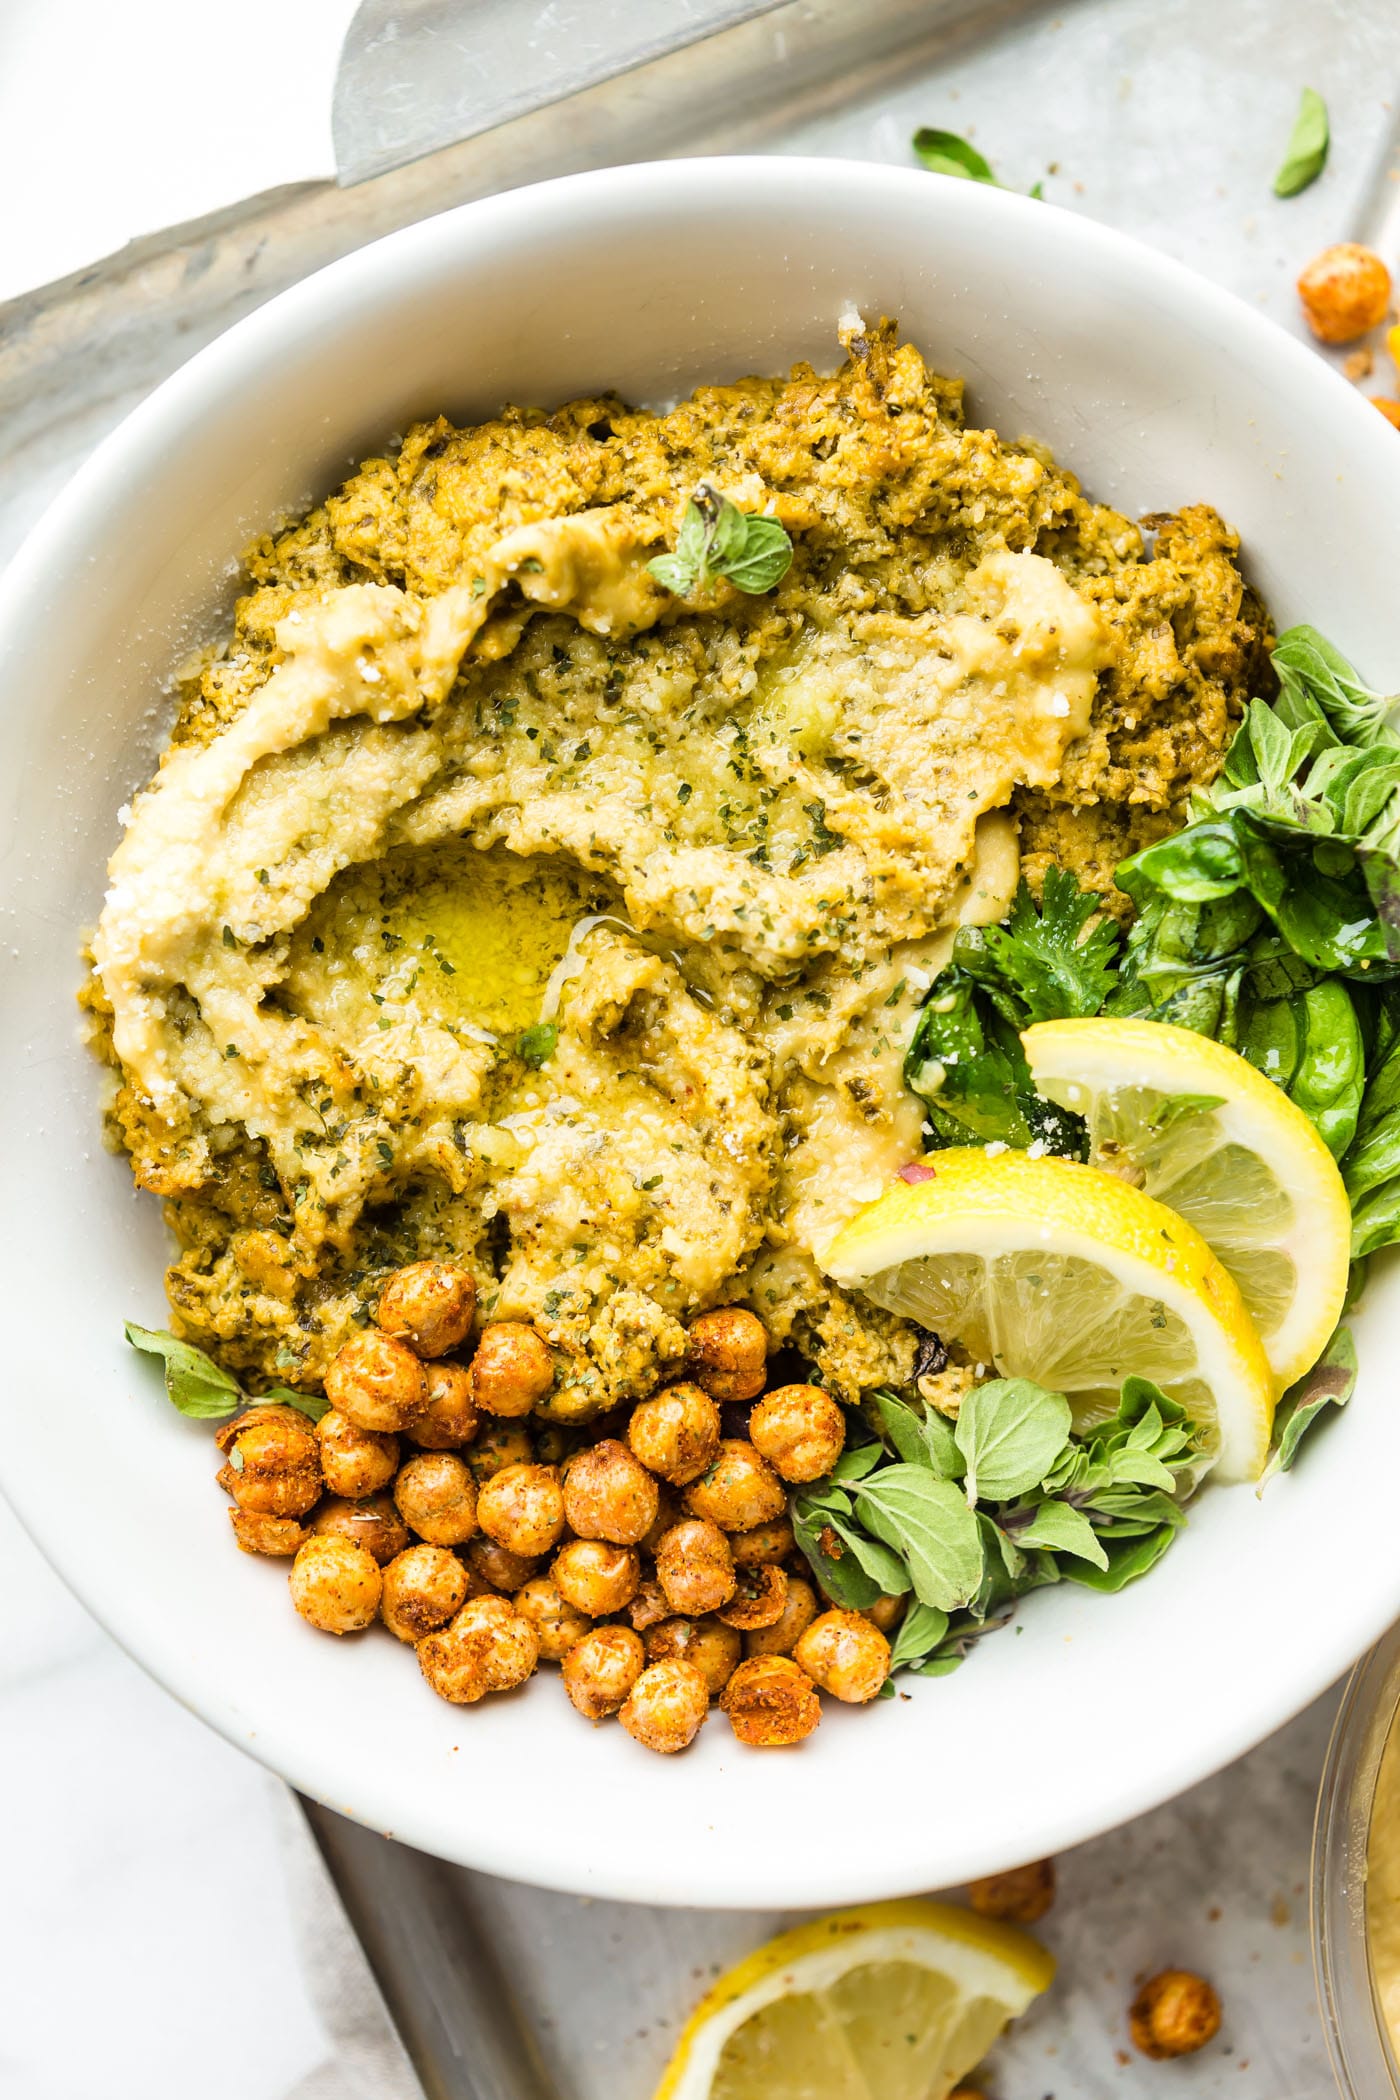 This Warm Mediterranean Spinach Artichoke Hummus Dip is a meal in itself. A vegetarian Mediterranean Baked Hummus Dip that's wholesome and healthy. Simple real food ingredients that you blend and bake! Gluten free, plant based, and delicious.